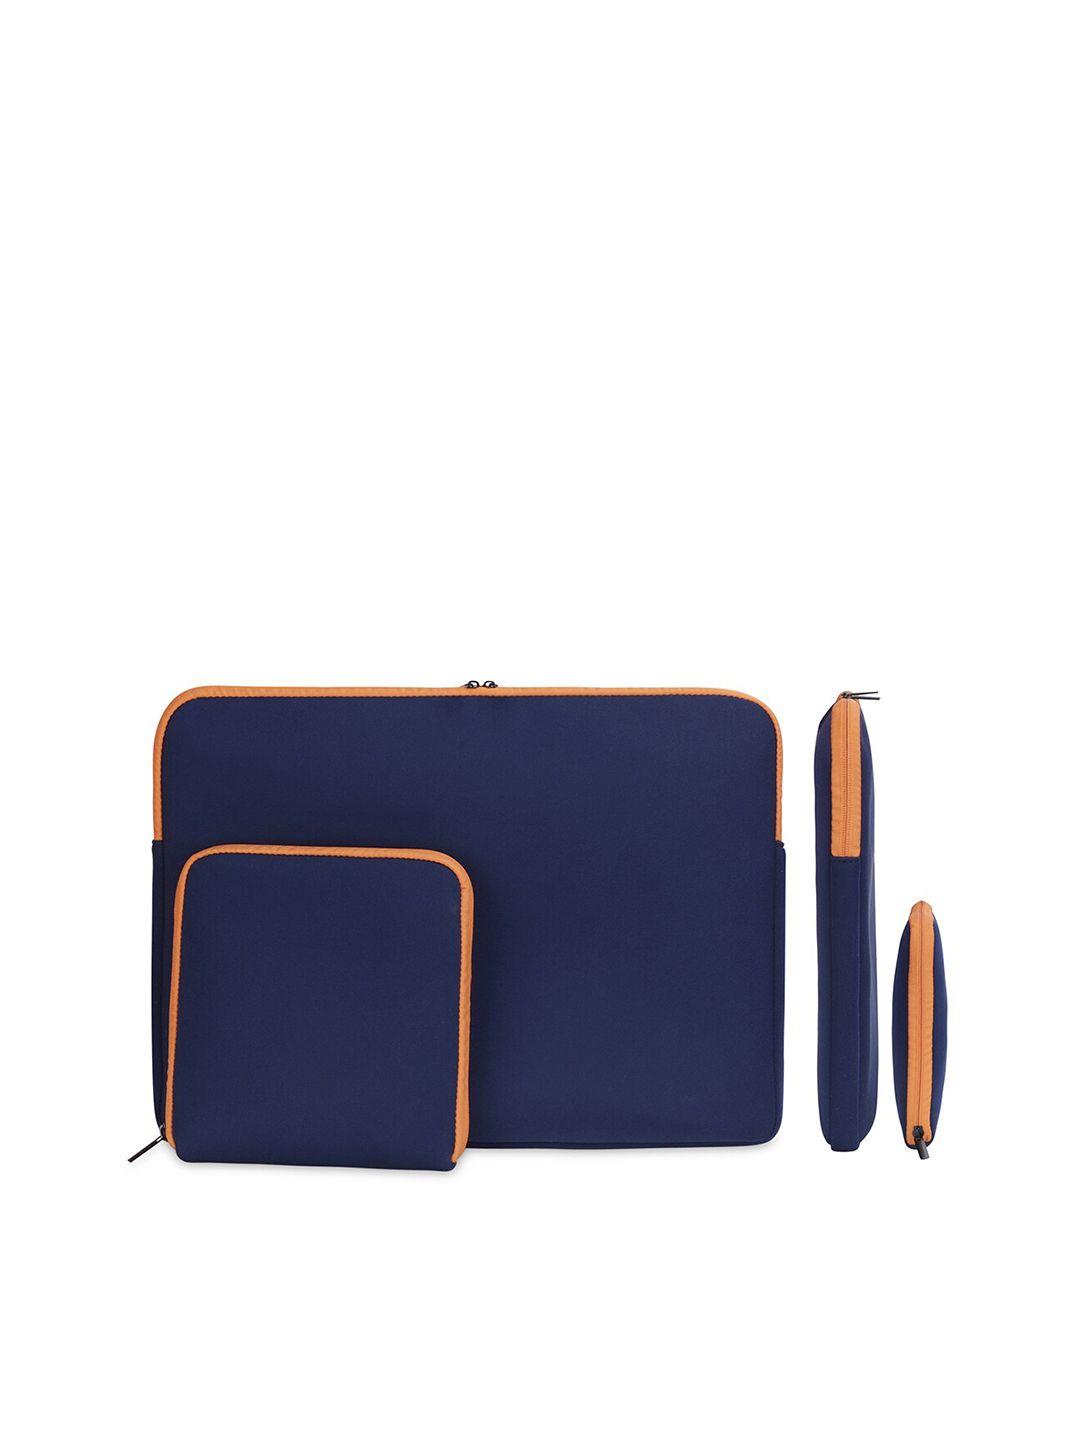 the clownfish navy blue & orange solid polyester laptop sleeve